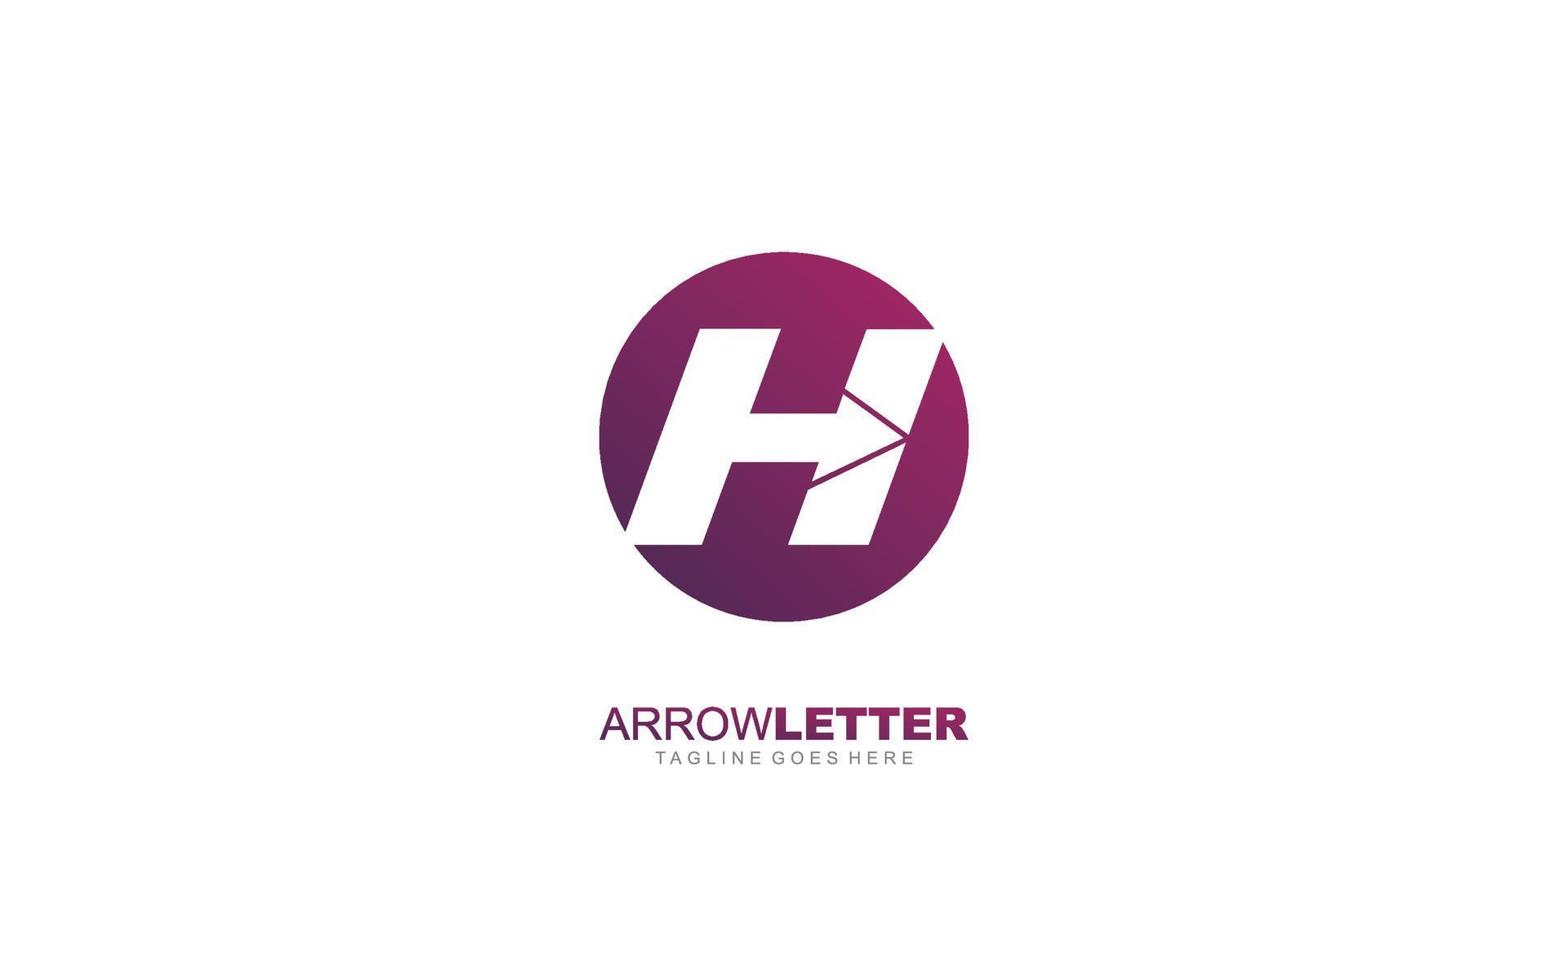 H logo business for branding company. arrow template vector illustration for your brand.